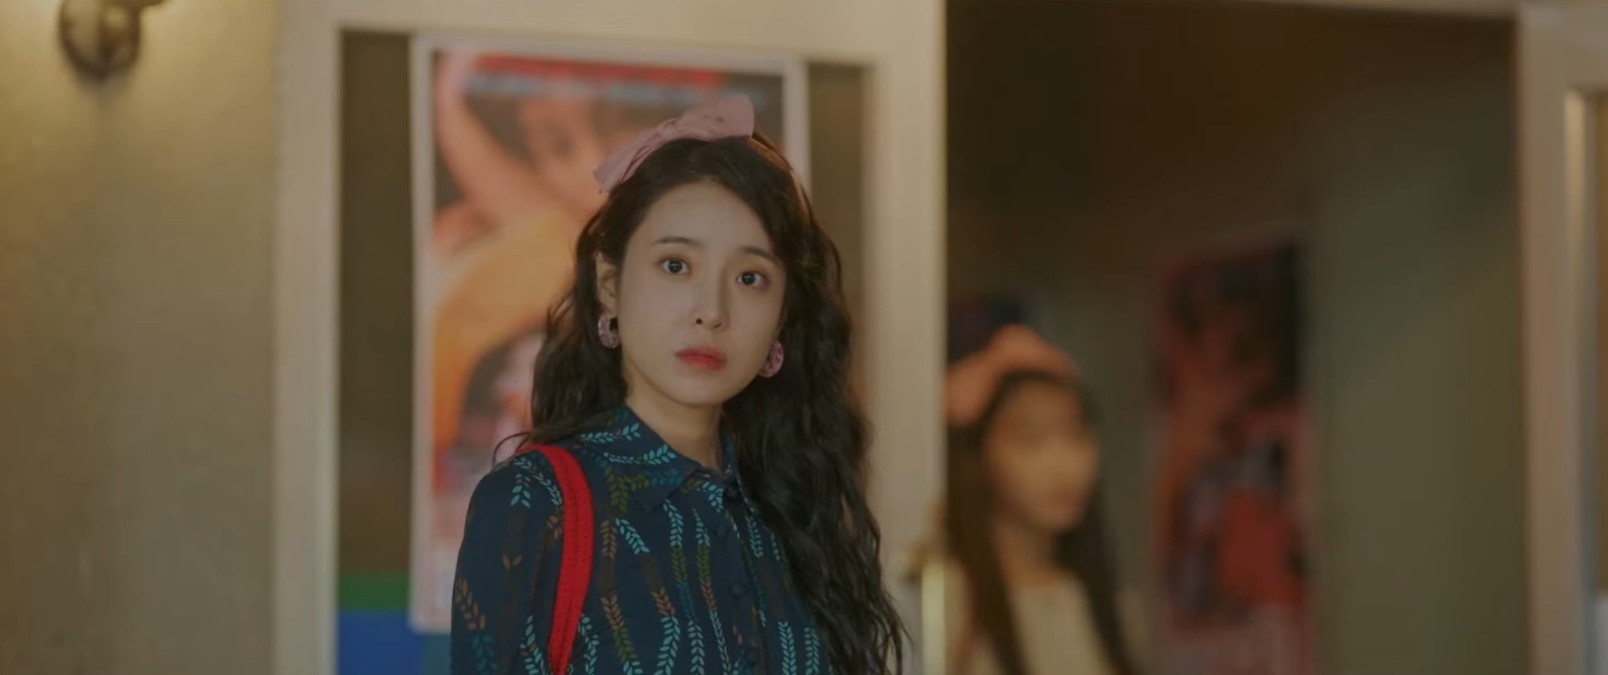 My Perfect Stranger Episode 10 Recap/Review: Mystery Behind the Pink Hairband